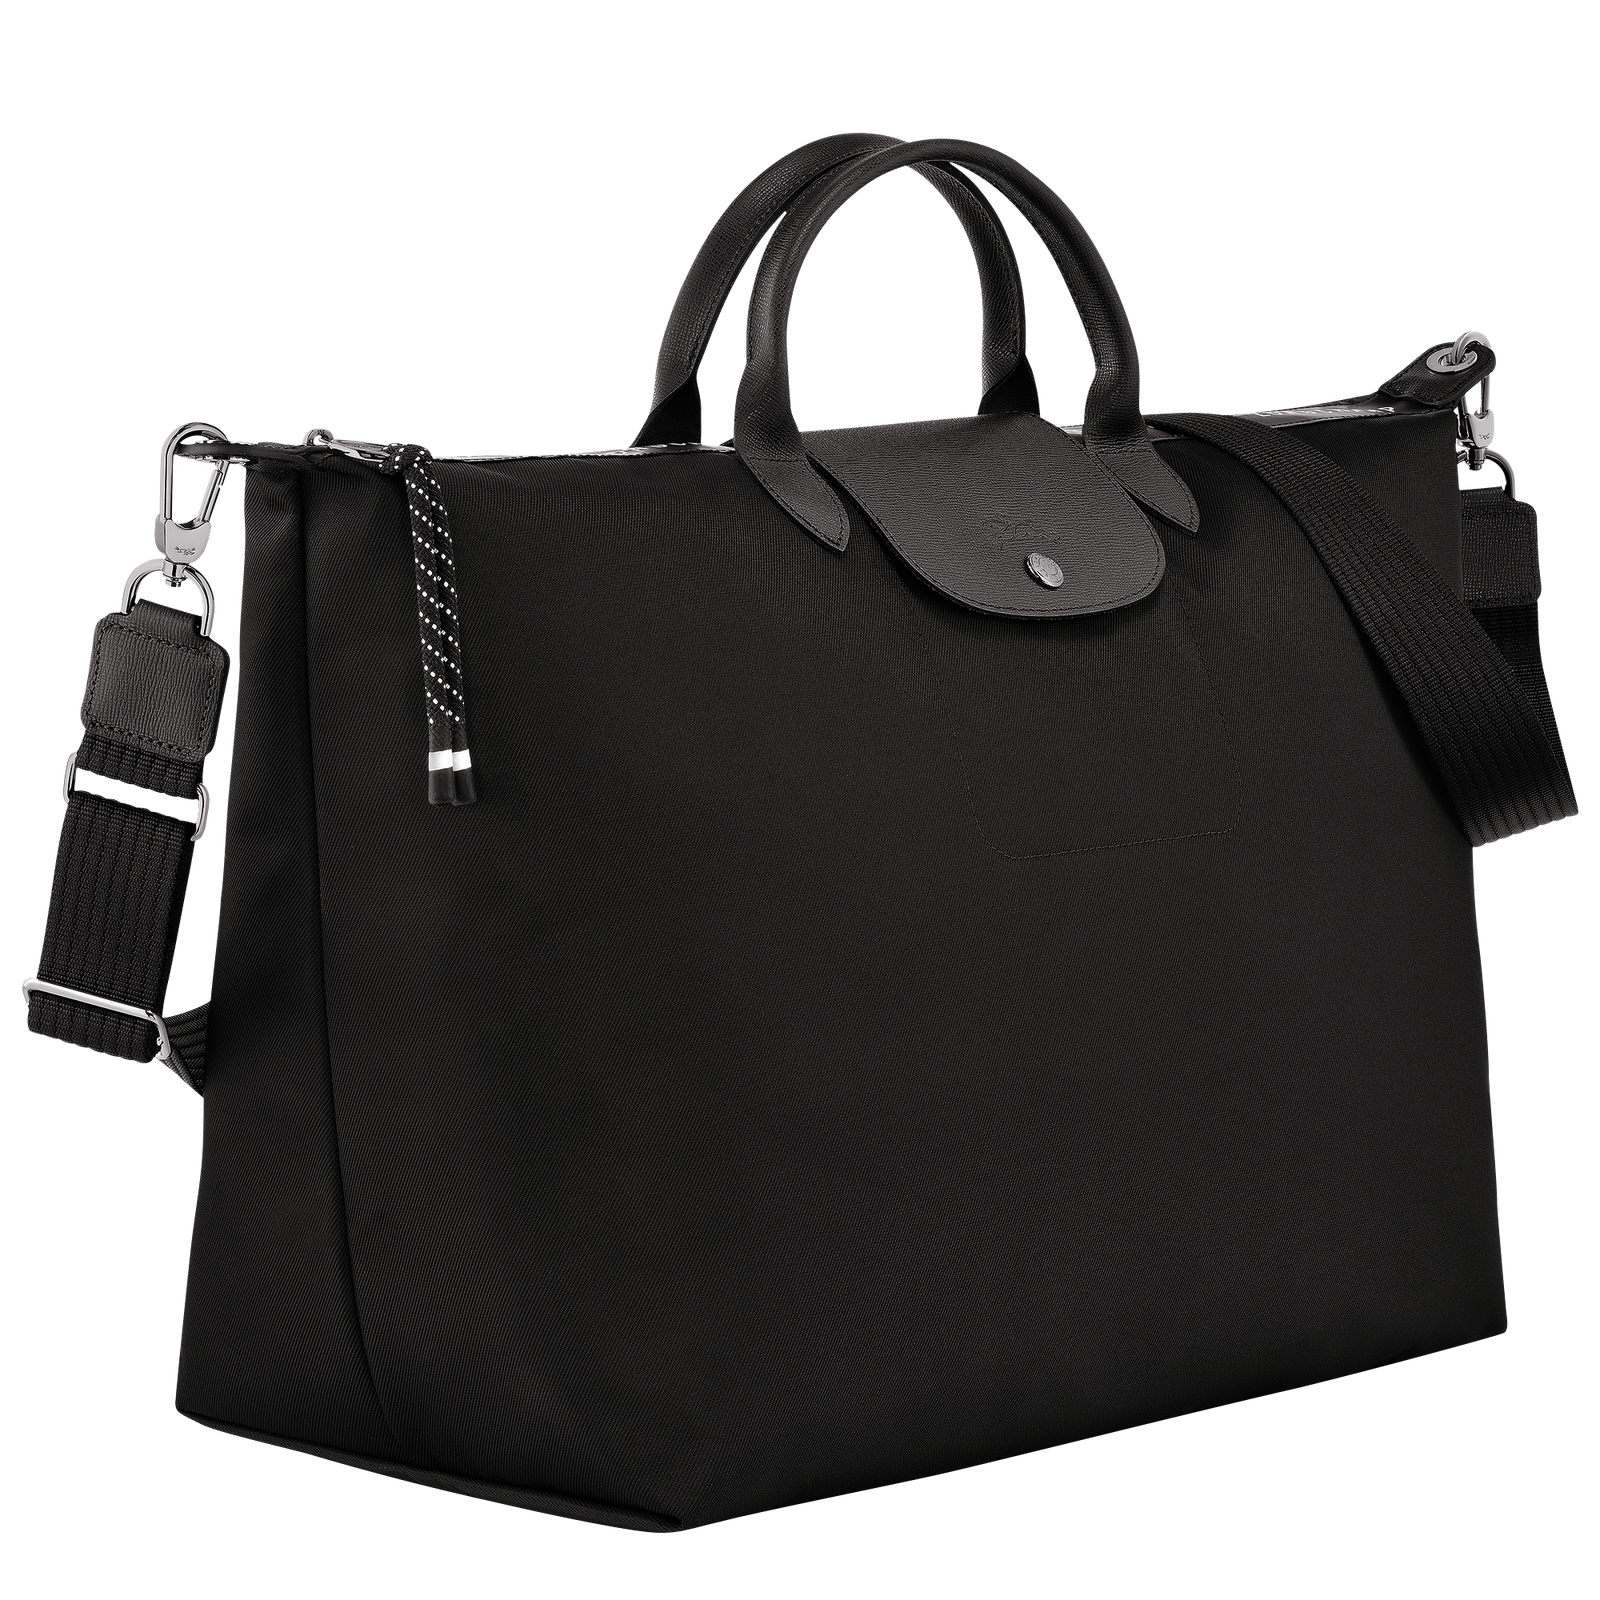 Le Pliage Energy S Travel bag Black - Recycled canvas